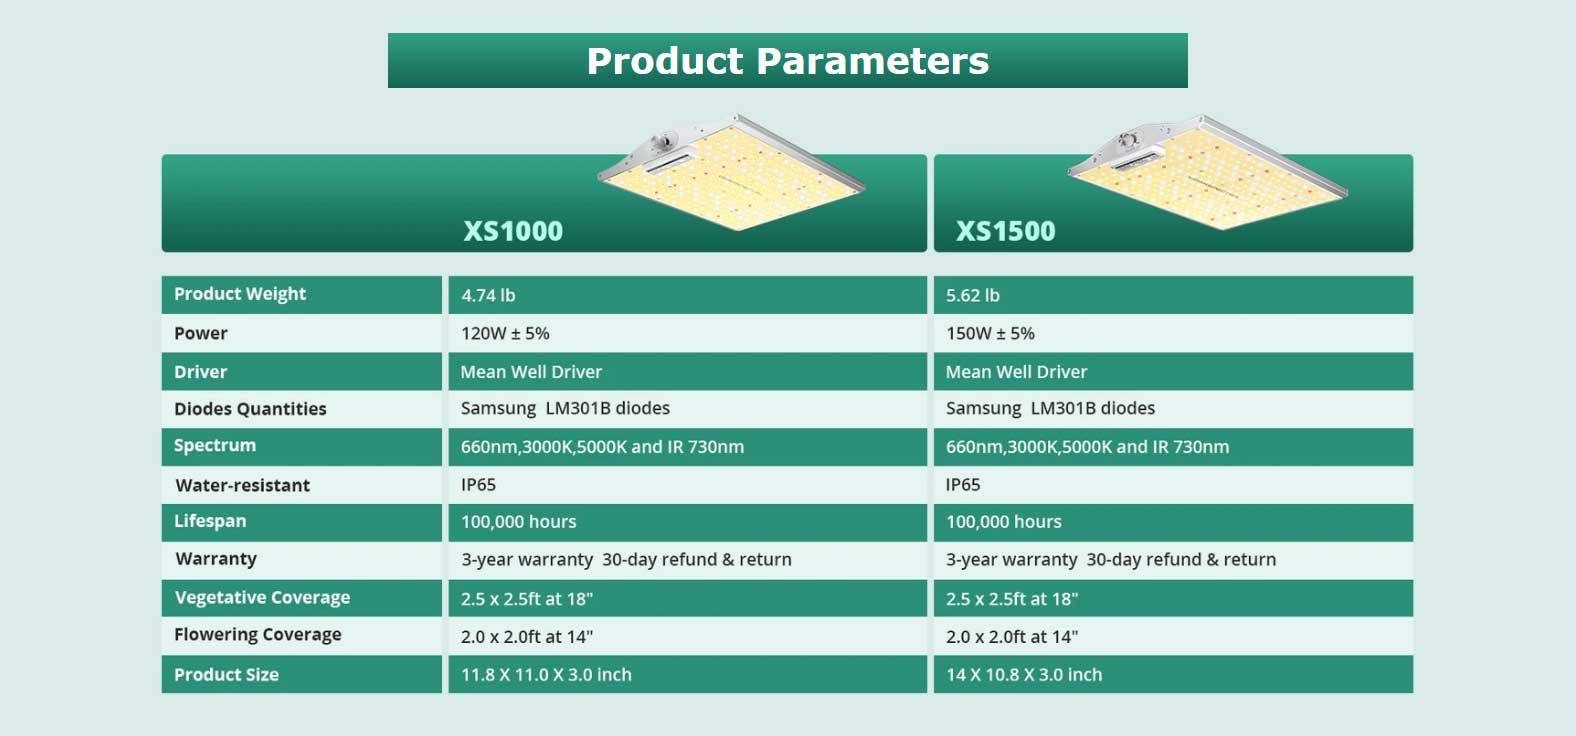 ViparSpectra-XS1000-XS1500-Product-Parameters